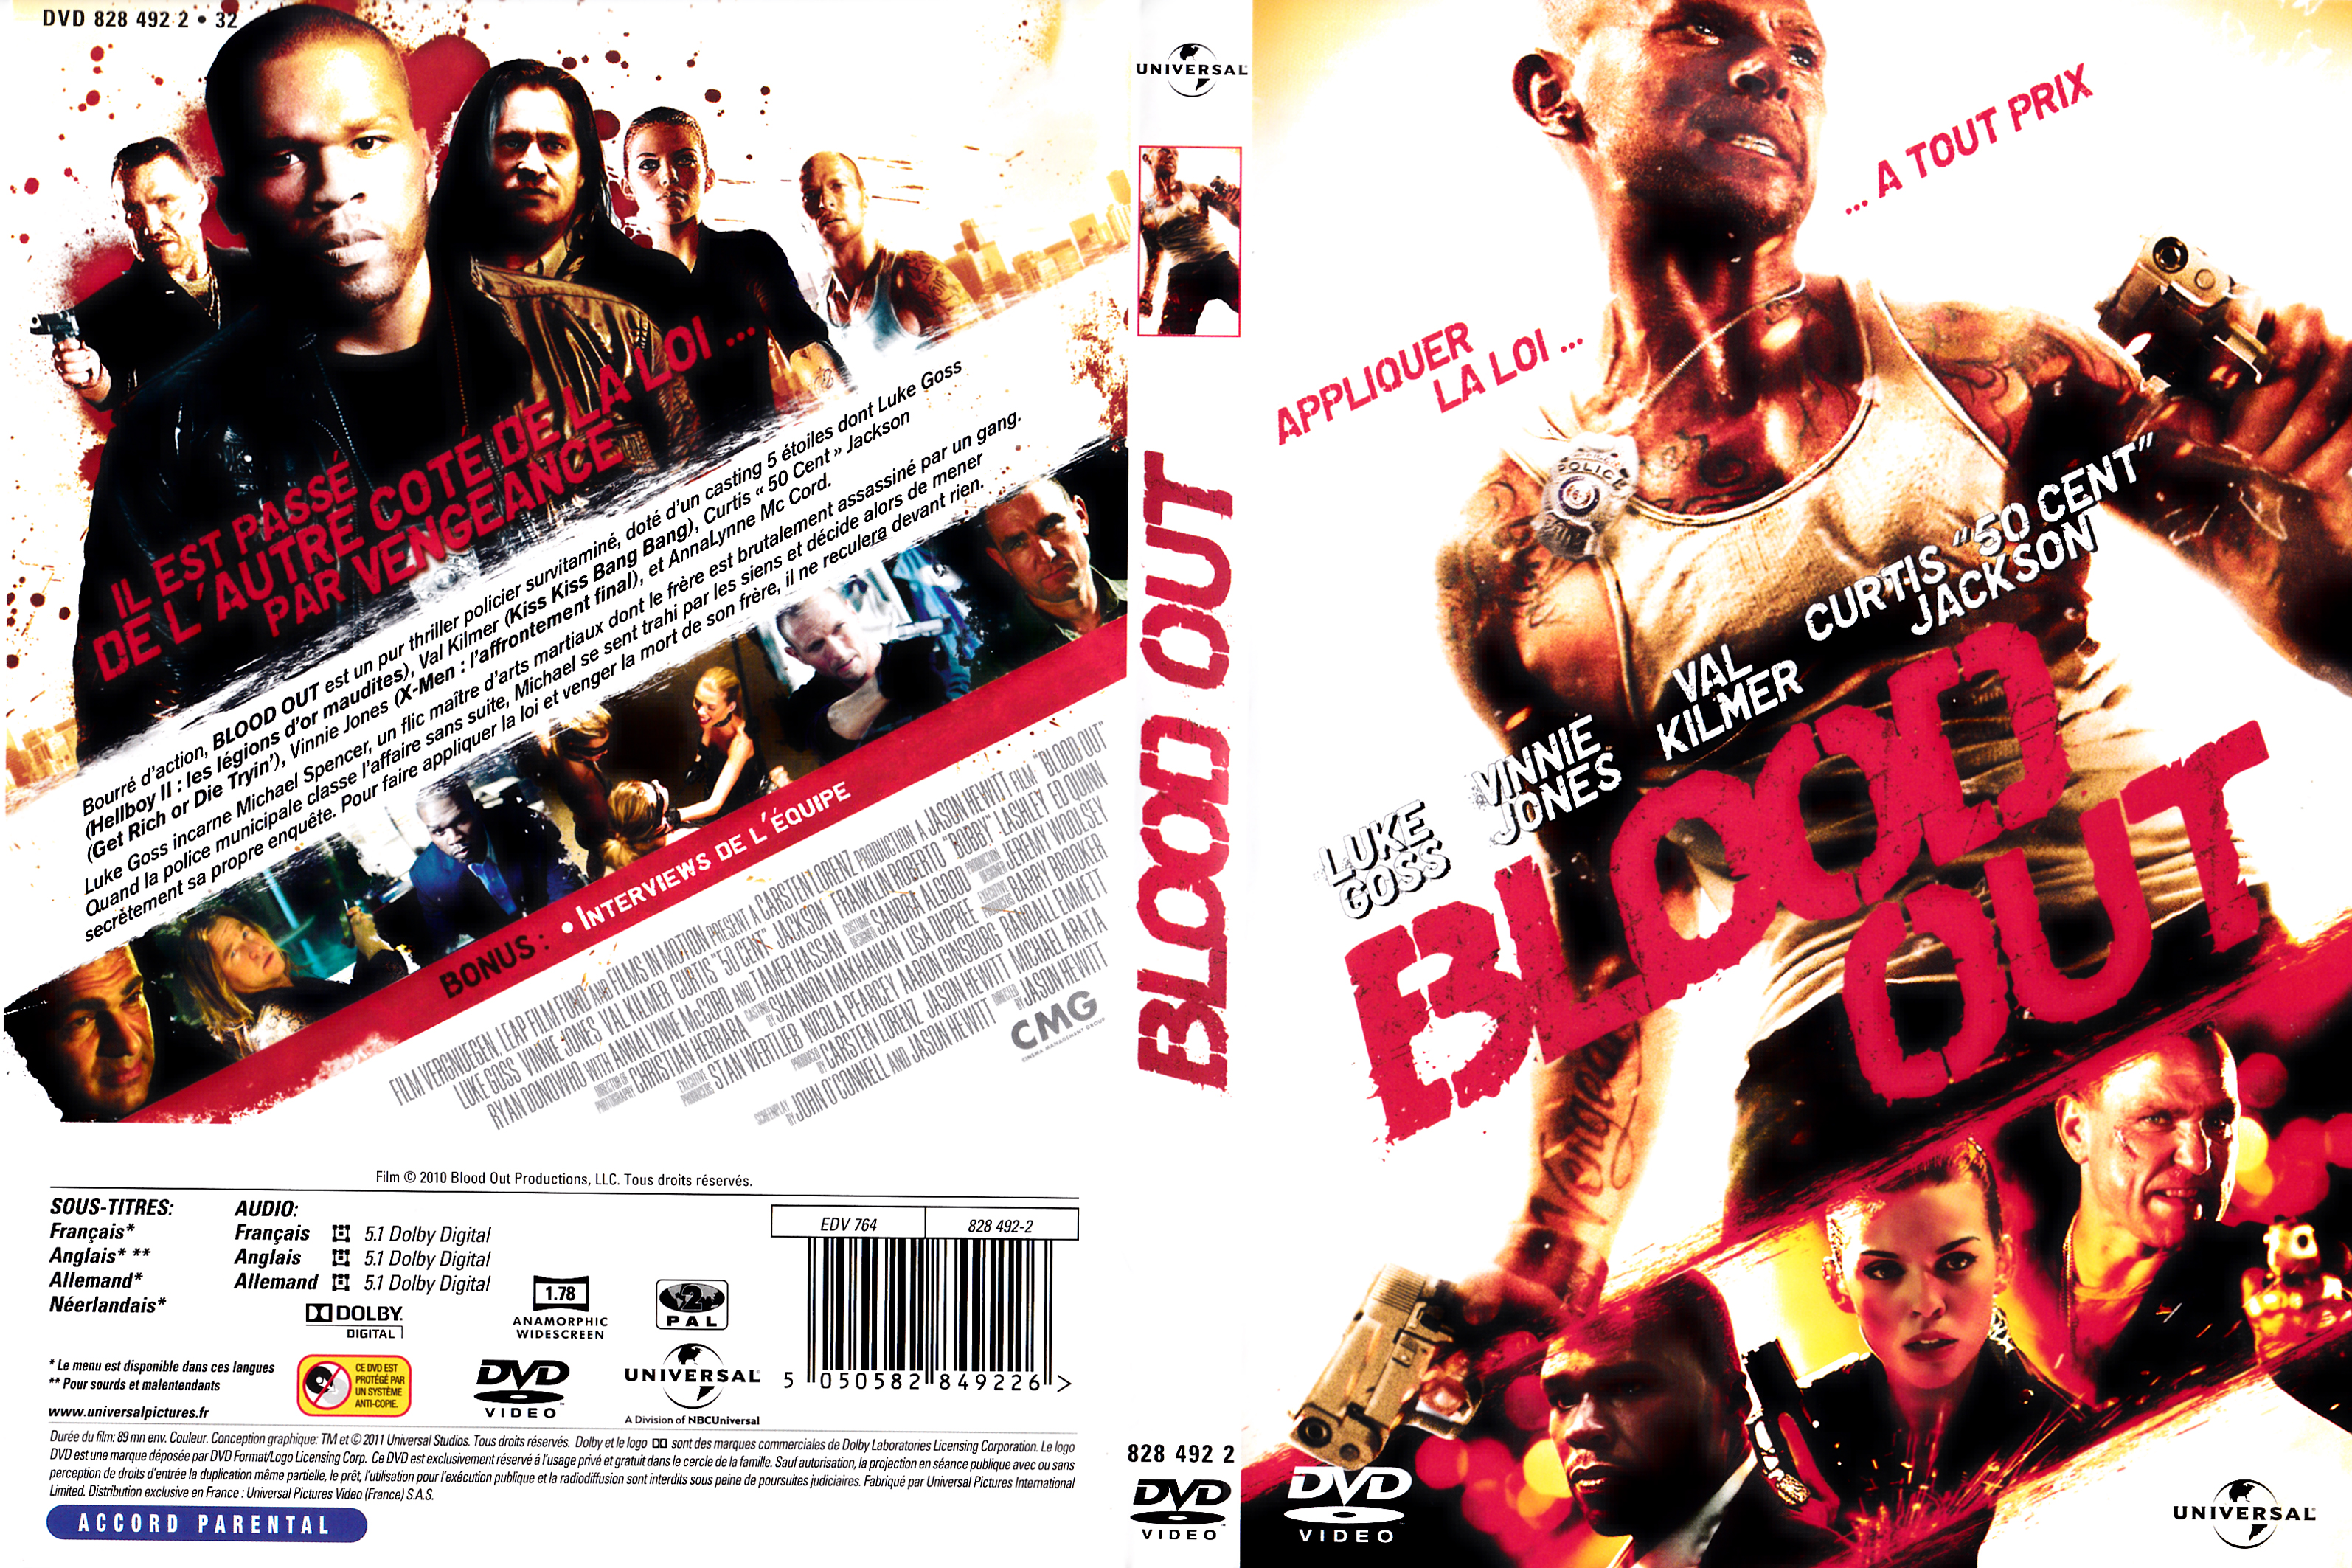 Jaquette DVD Blood out